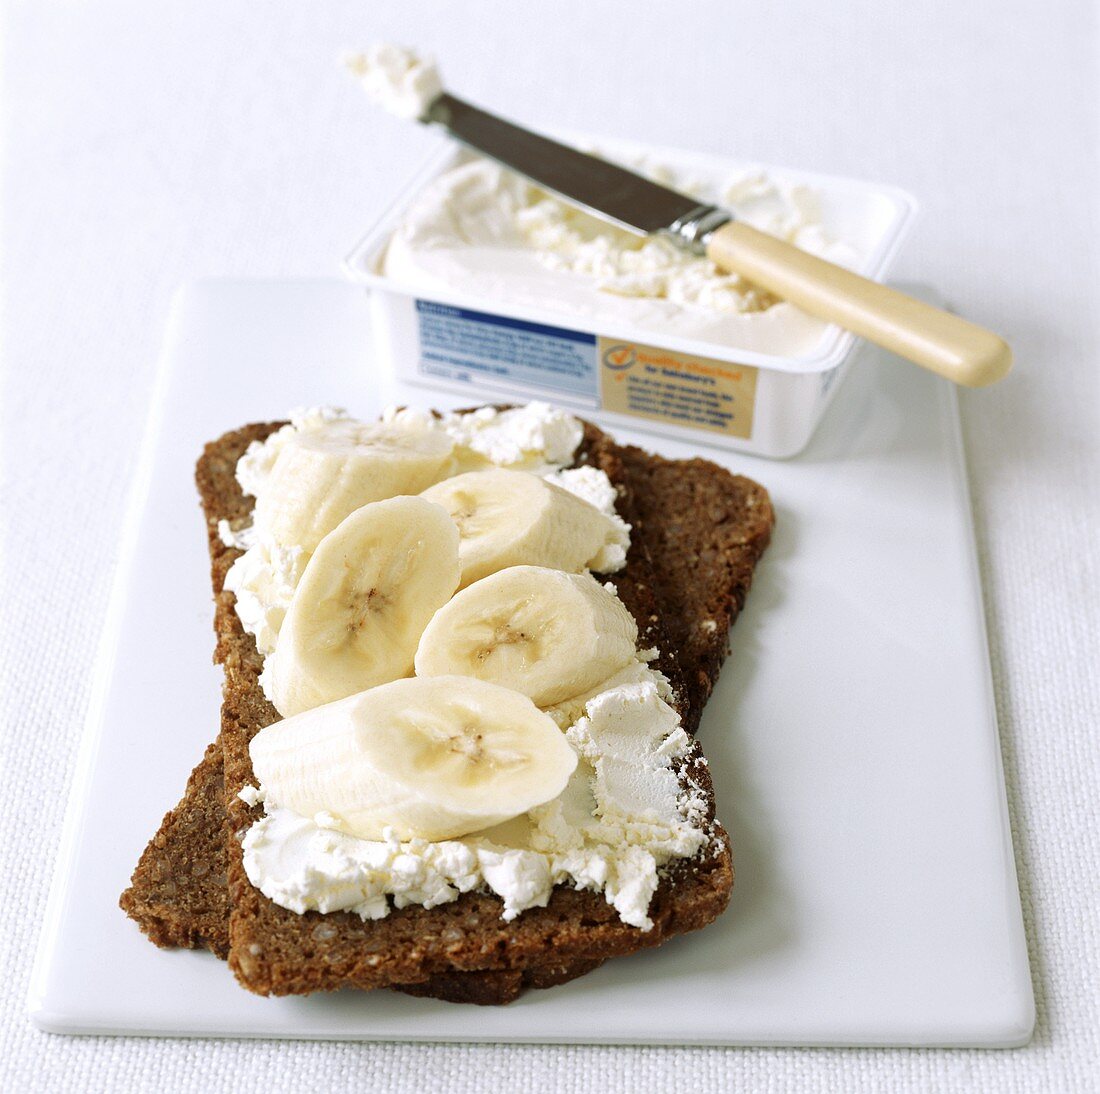 Wholemeal bread topped with soft cheese and banana slices